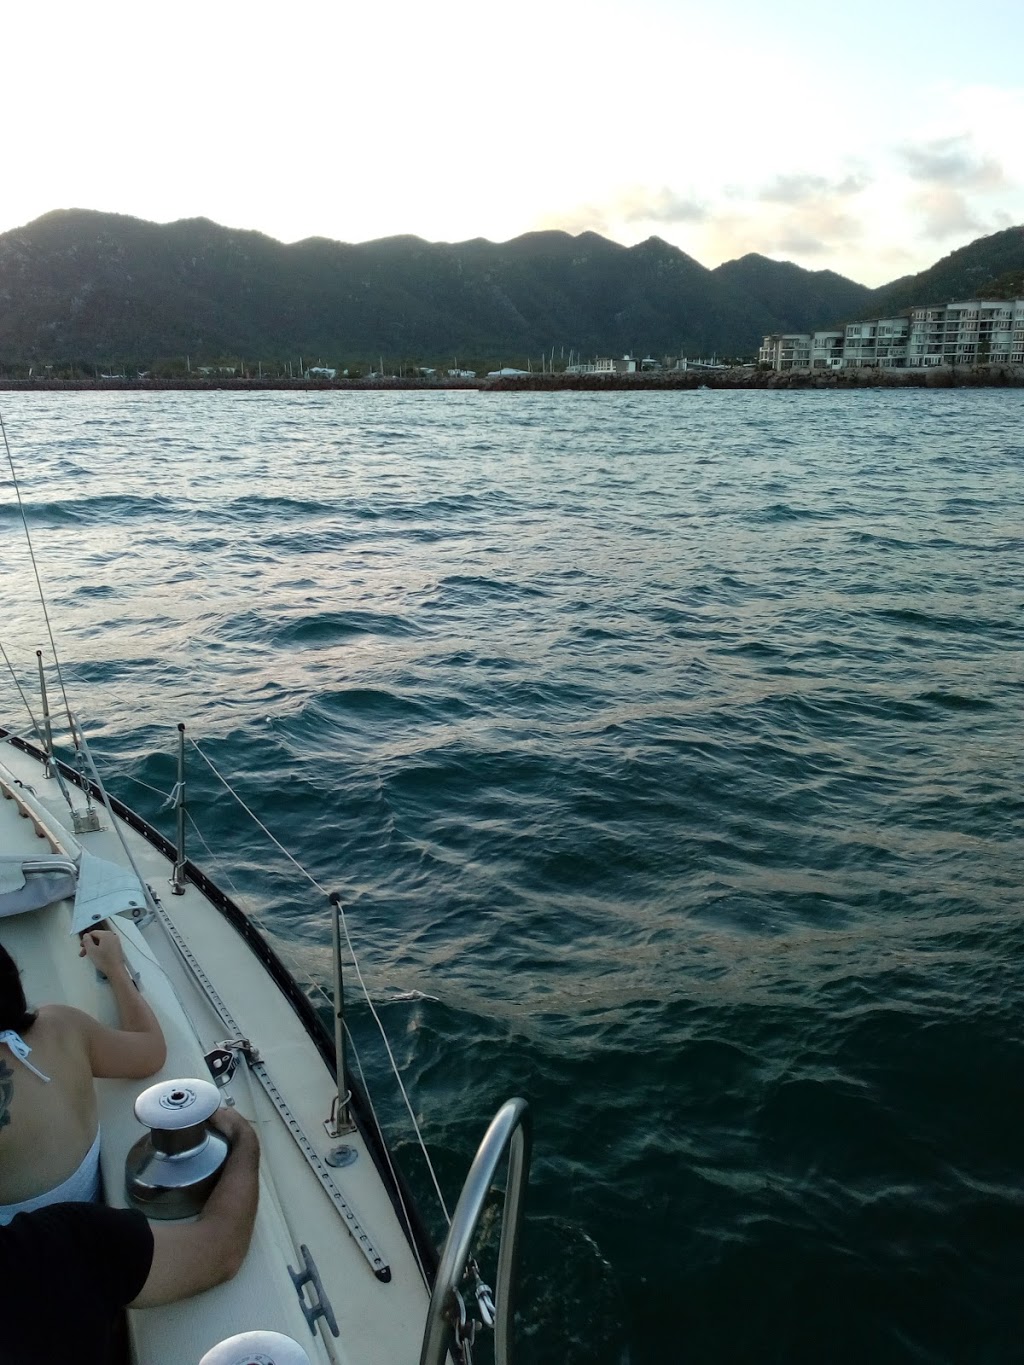 Casual Fare Sailing Charters Magnetic Island | magnetic island marina, 123 Sooning St, Nelly Bay QLD 4819, Australia | Phone: 0459 270 557